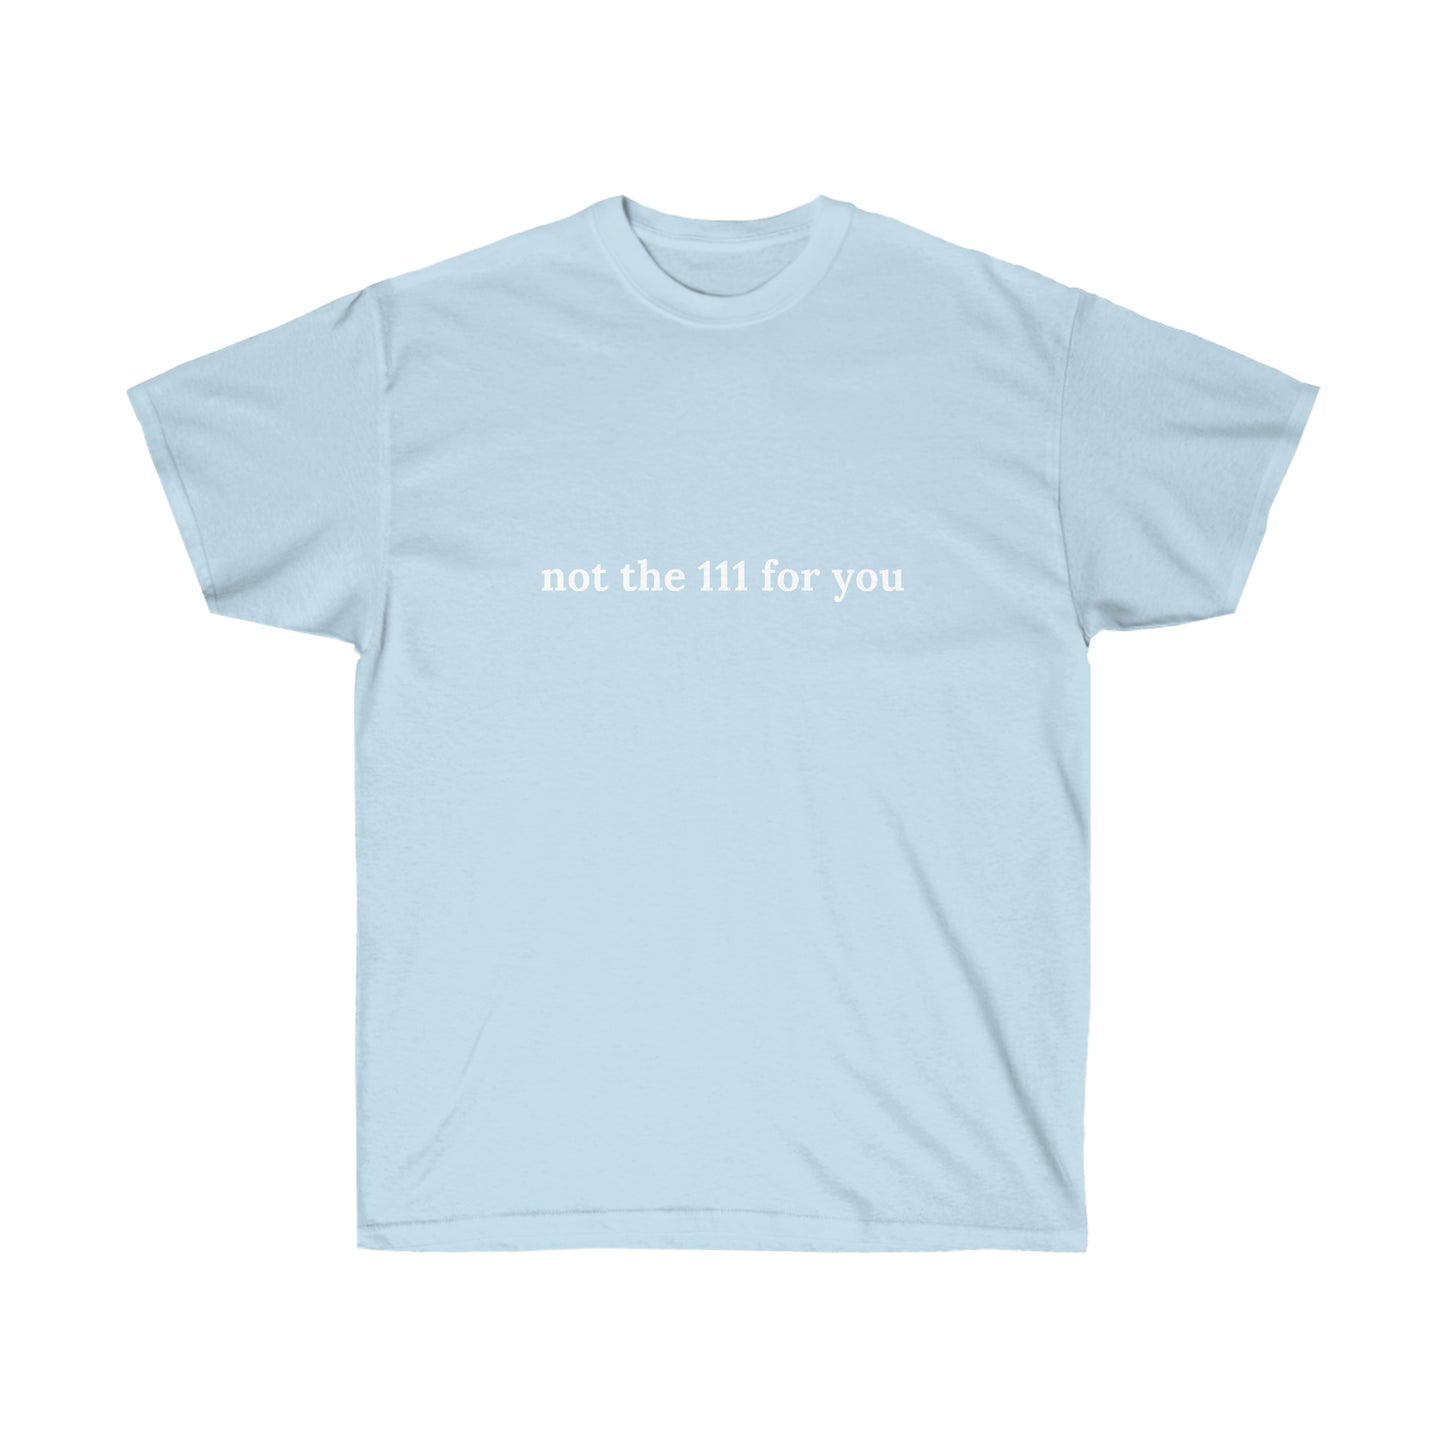 Not the 111 for u | tee